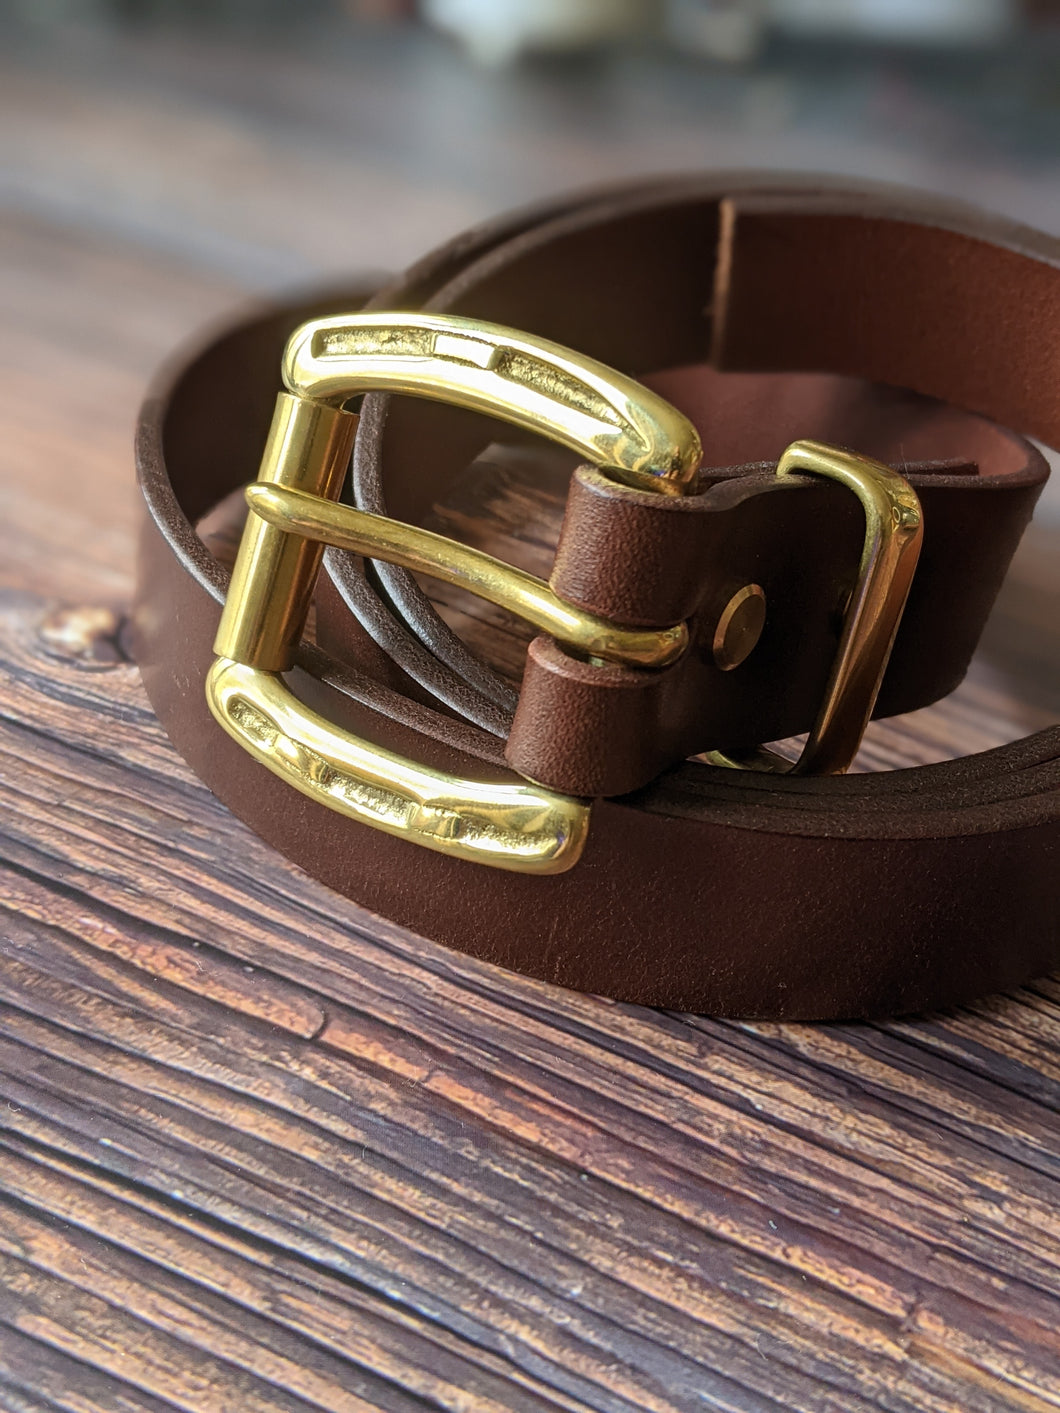 The Pendle - 32mm wide belt 38in to middle hole, Dark Brown Vegtan Leather with Handcast British Made Brass Fittings